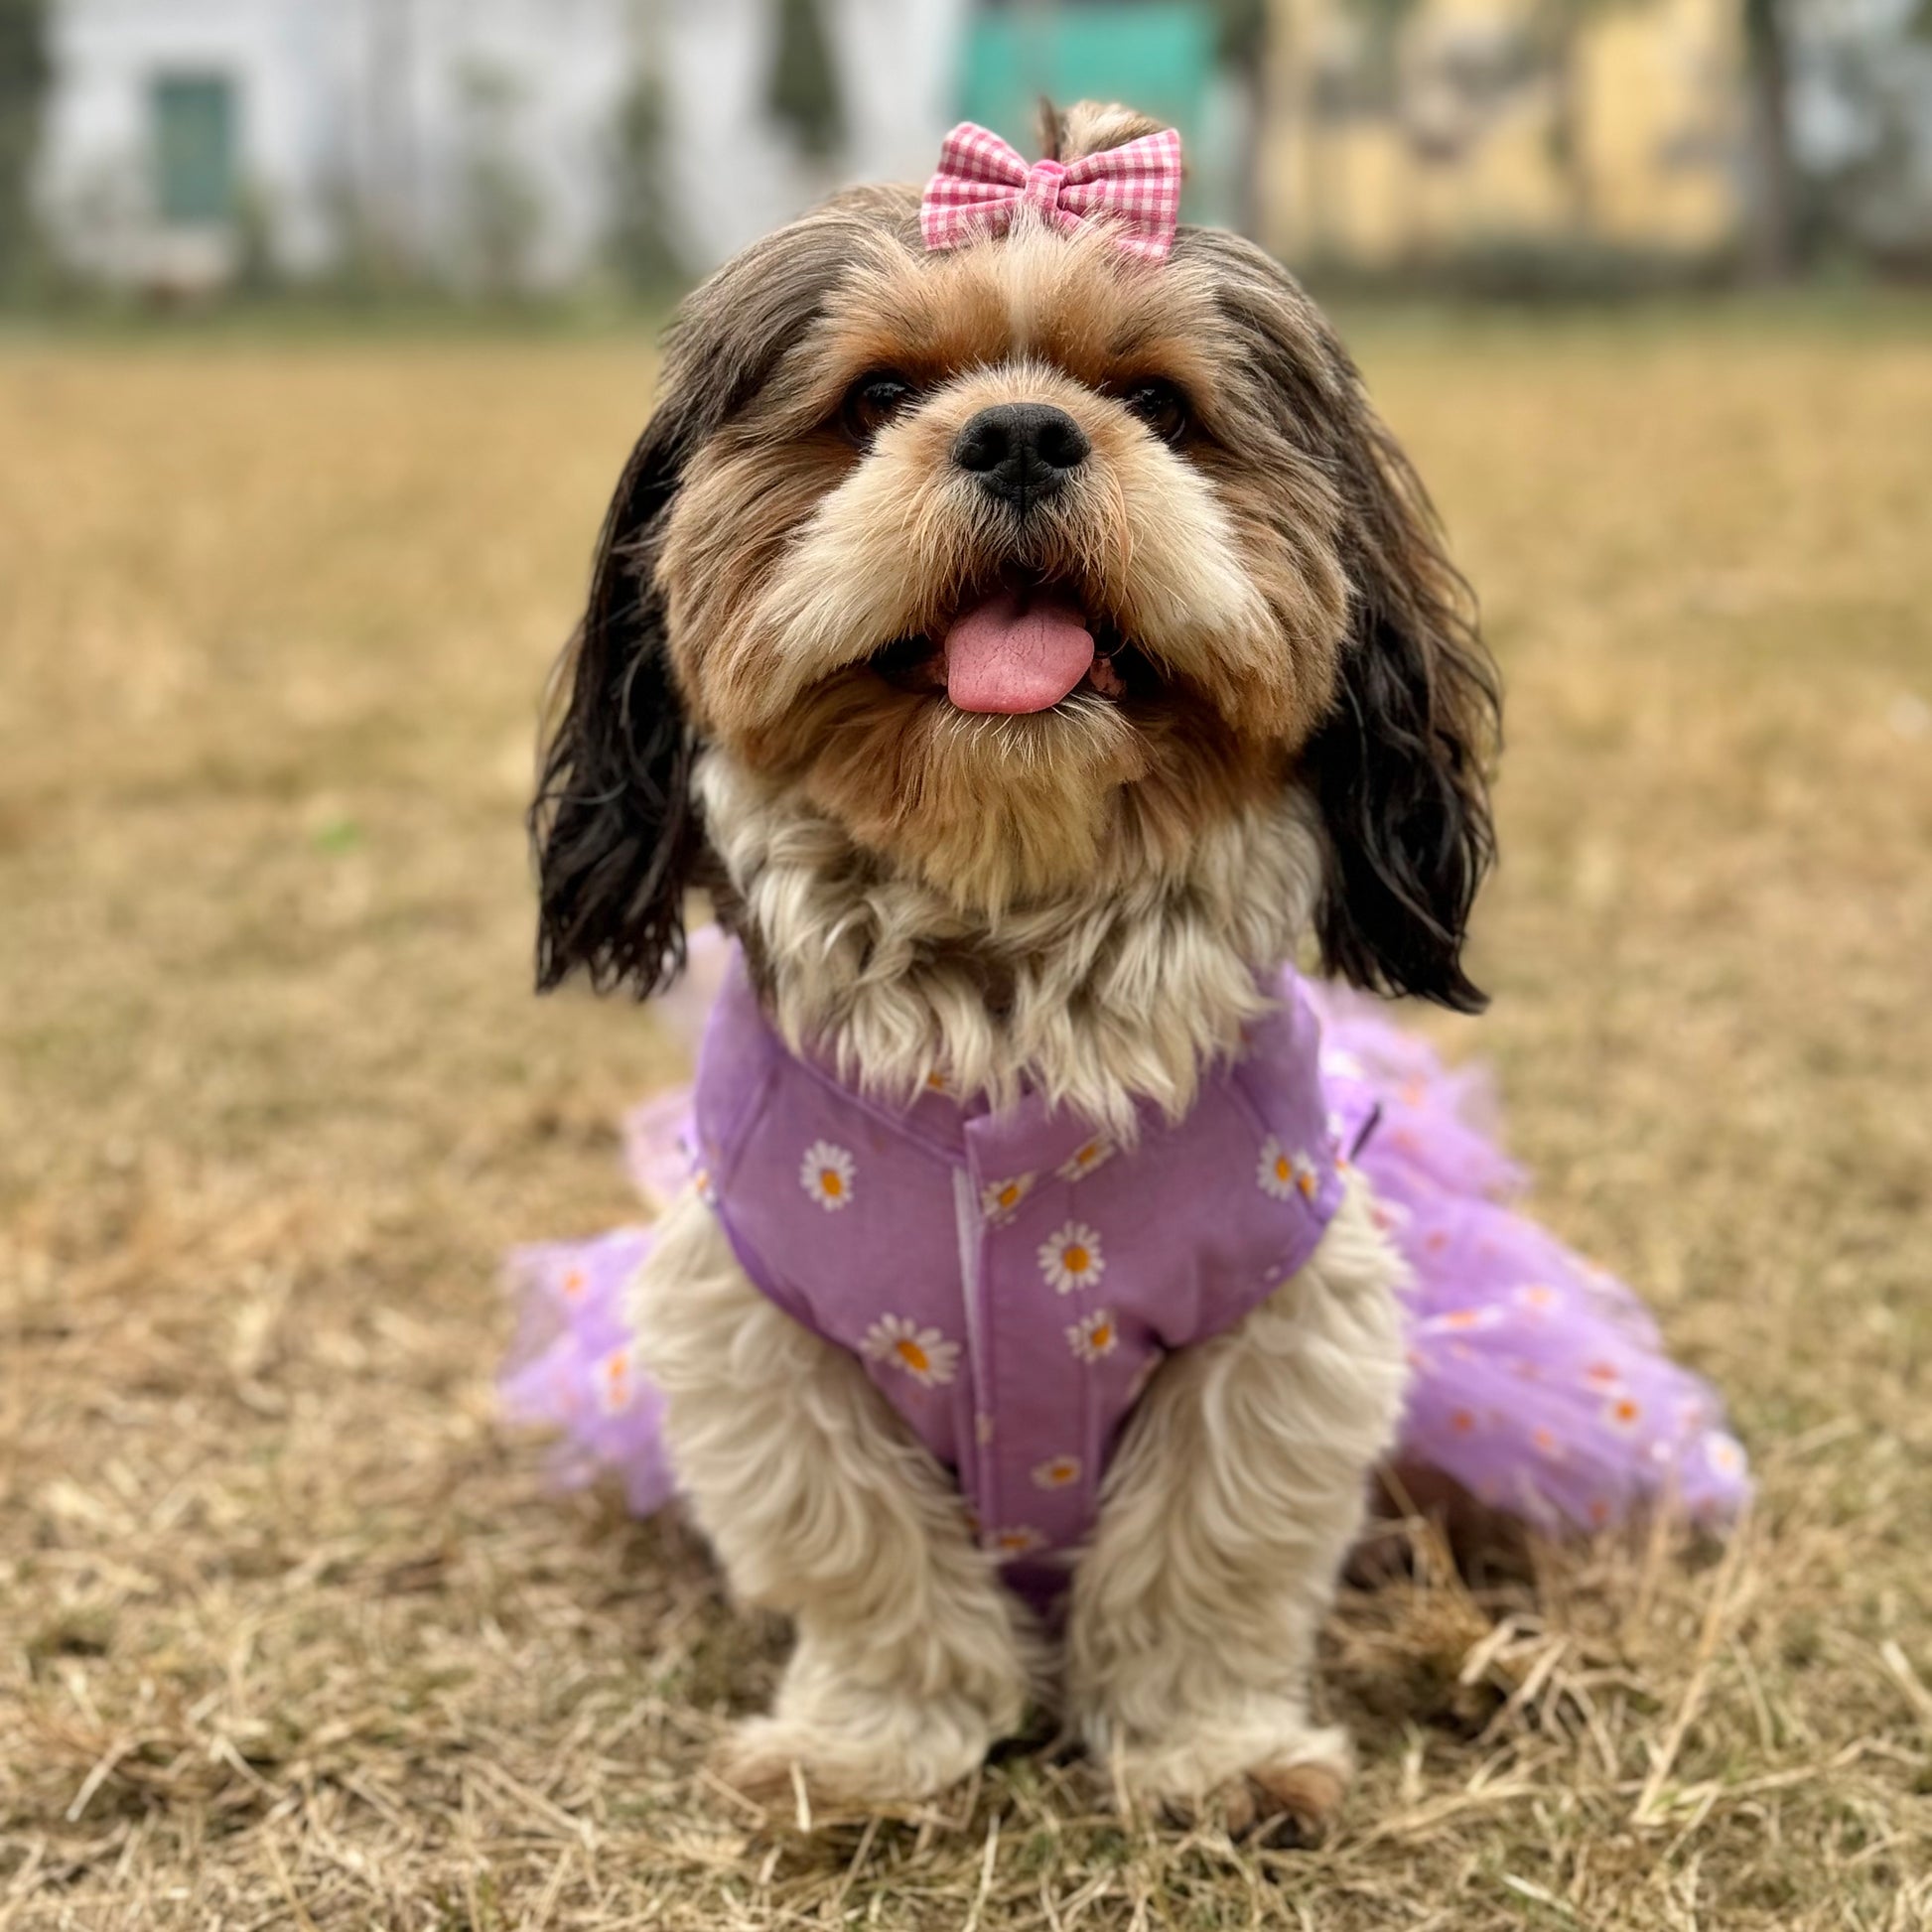 Pawgy Pets Frilly Dress Purple for Dogs